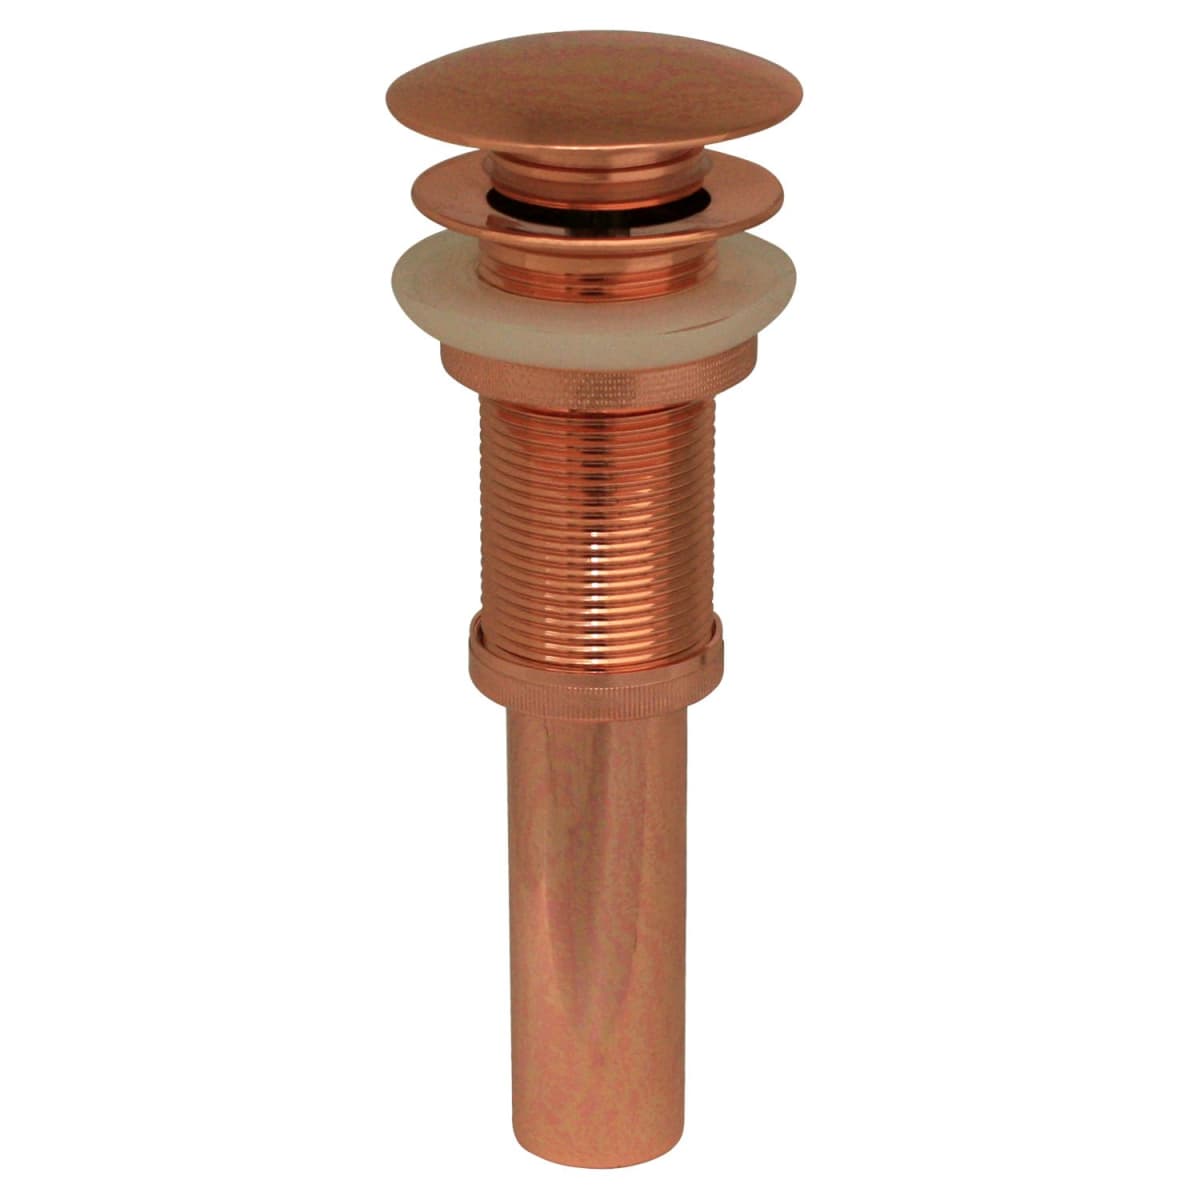 Whitehaus Whd01 Co Polished Copper Accessory Drain Assembly